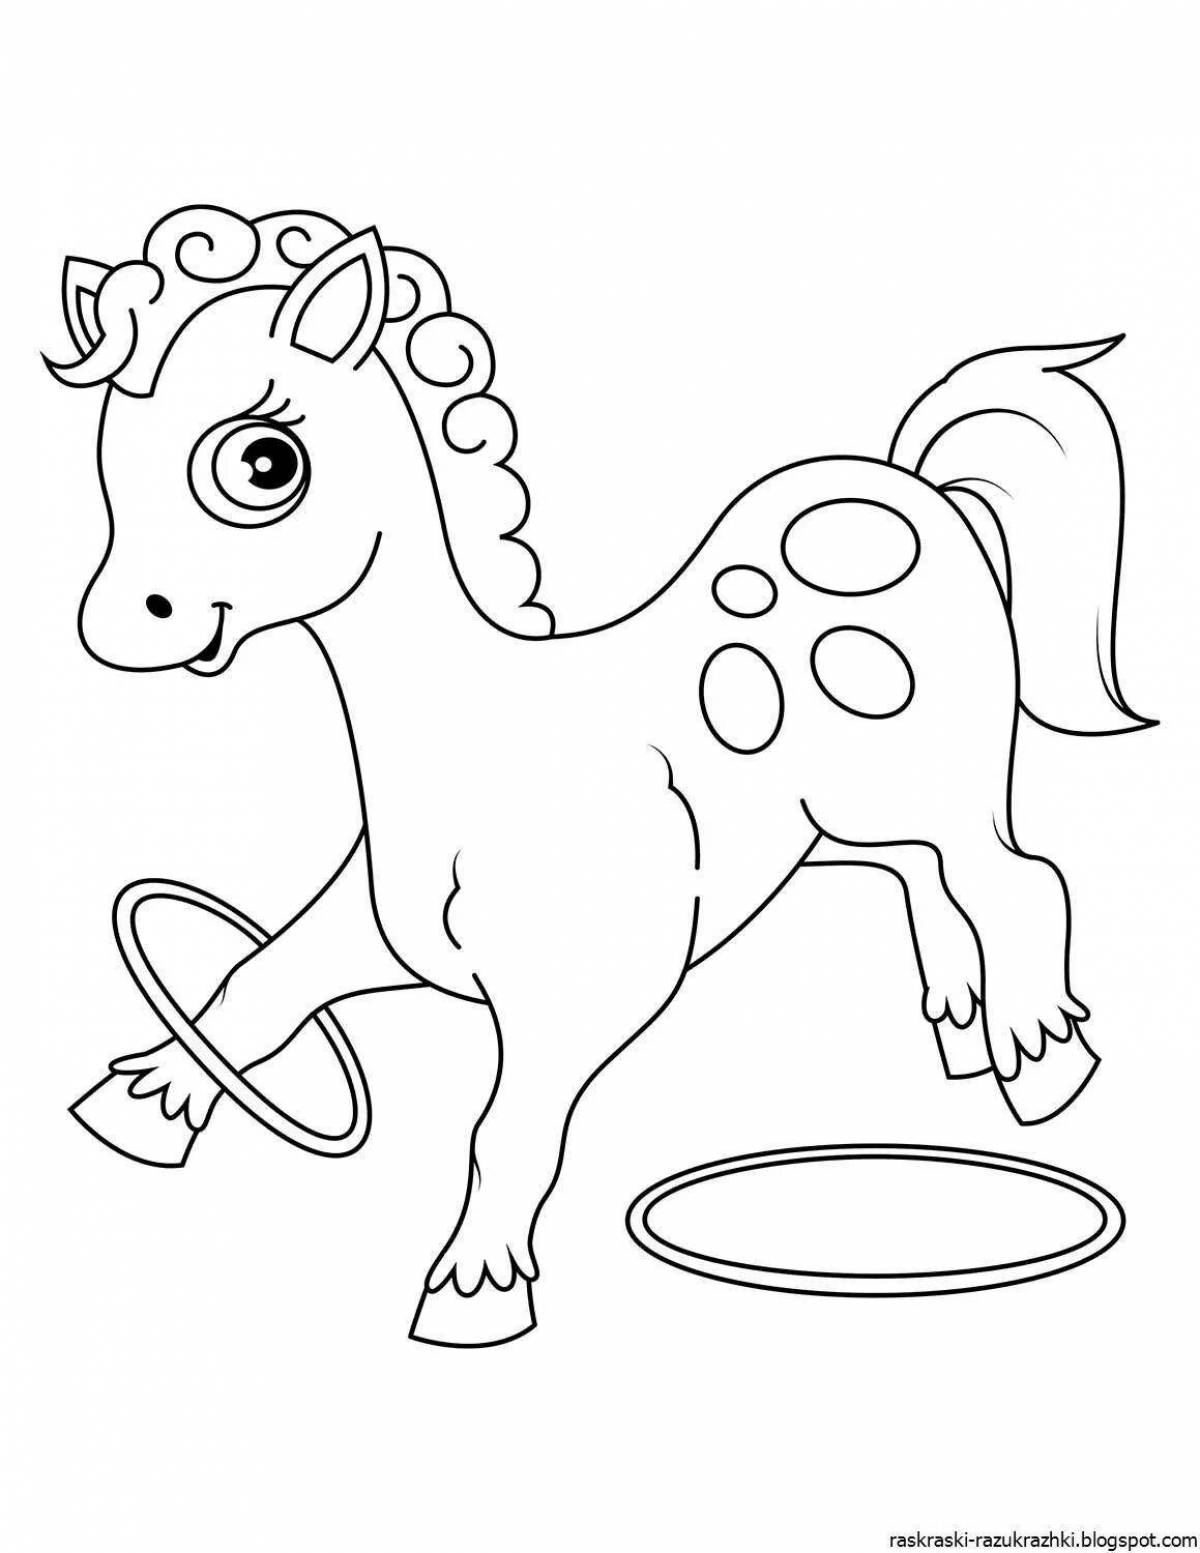 Color the crazy horse coloring pages for 2-3 year olds